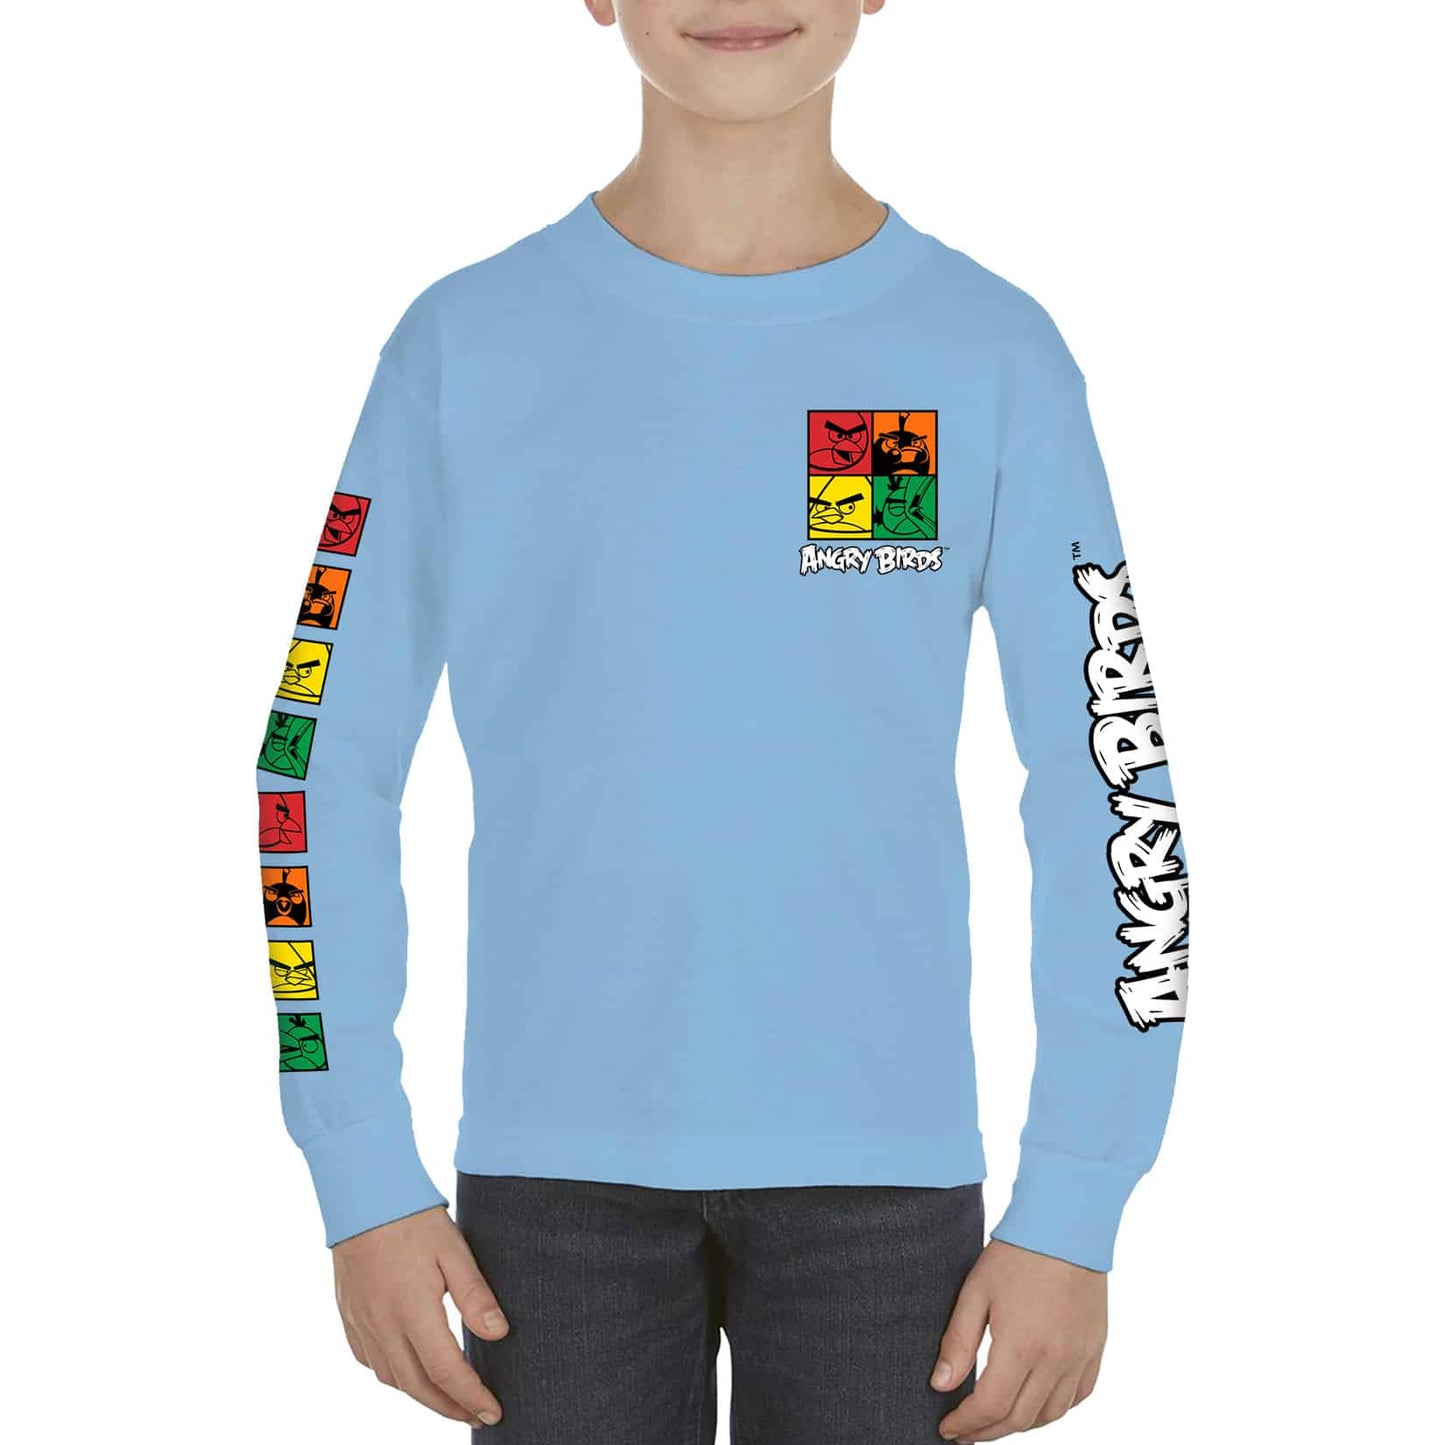 ANGRY BIRDS OFFICAIL LONG SLEEVE KIDS T-SHIRTS